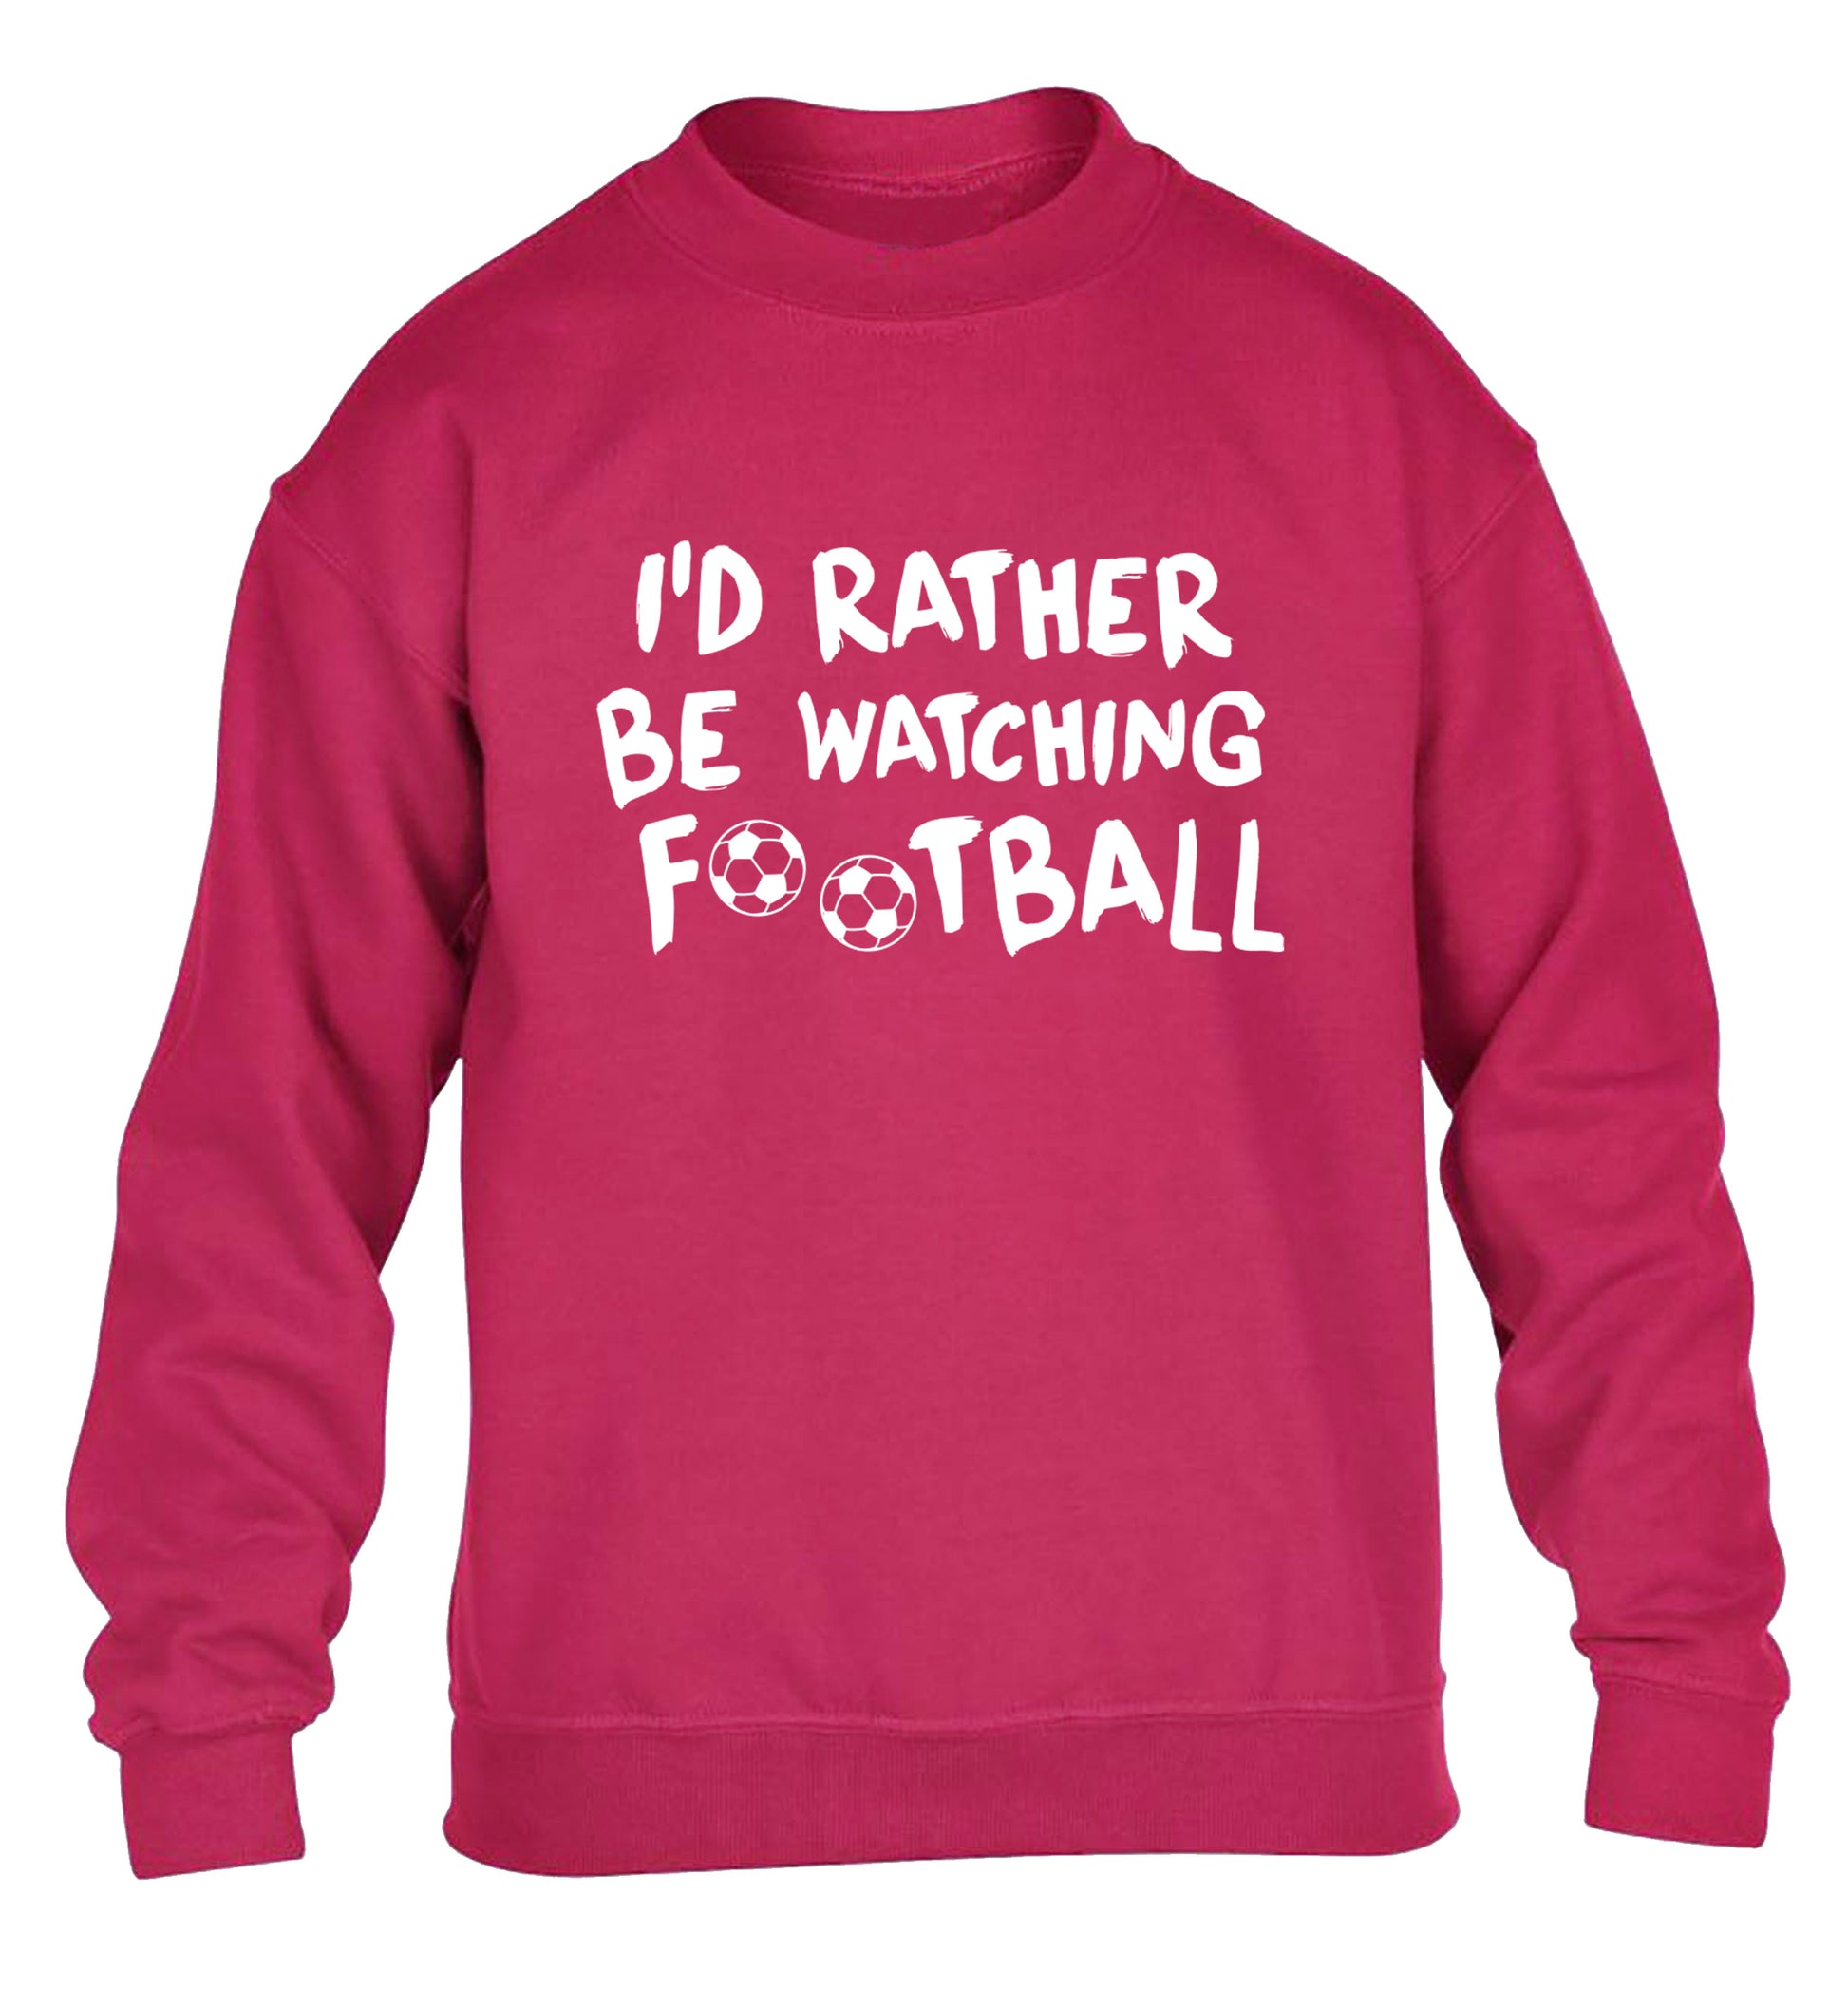 I'd rather be watching football children's pink sweater 12-14 Years